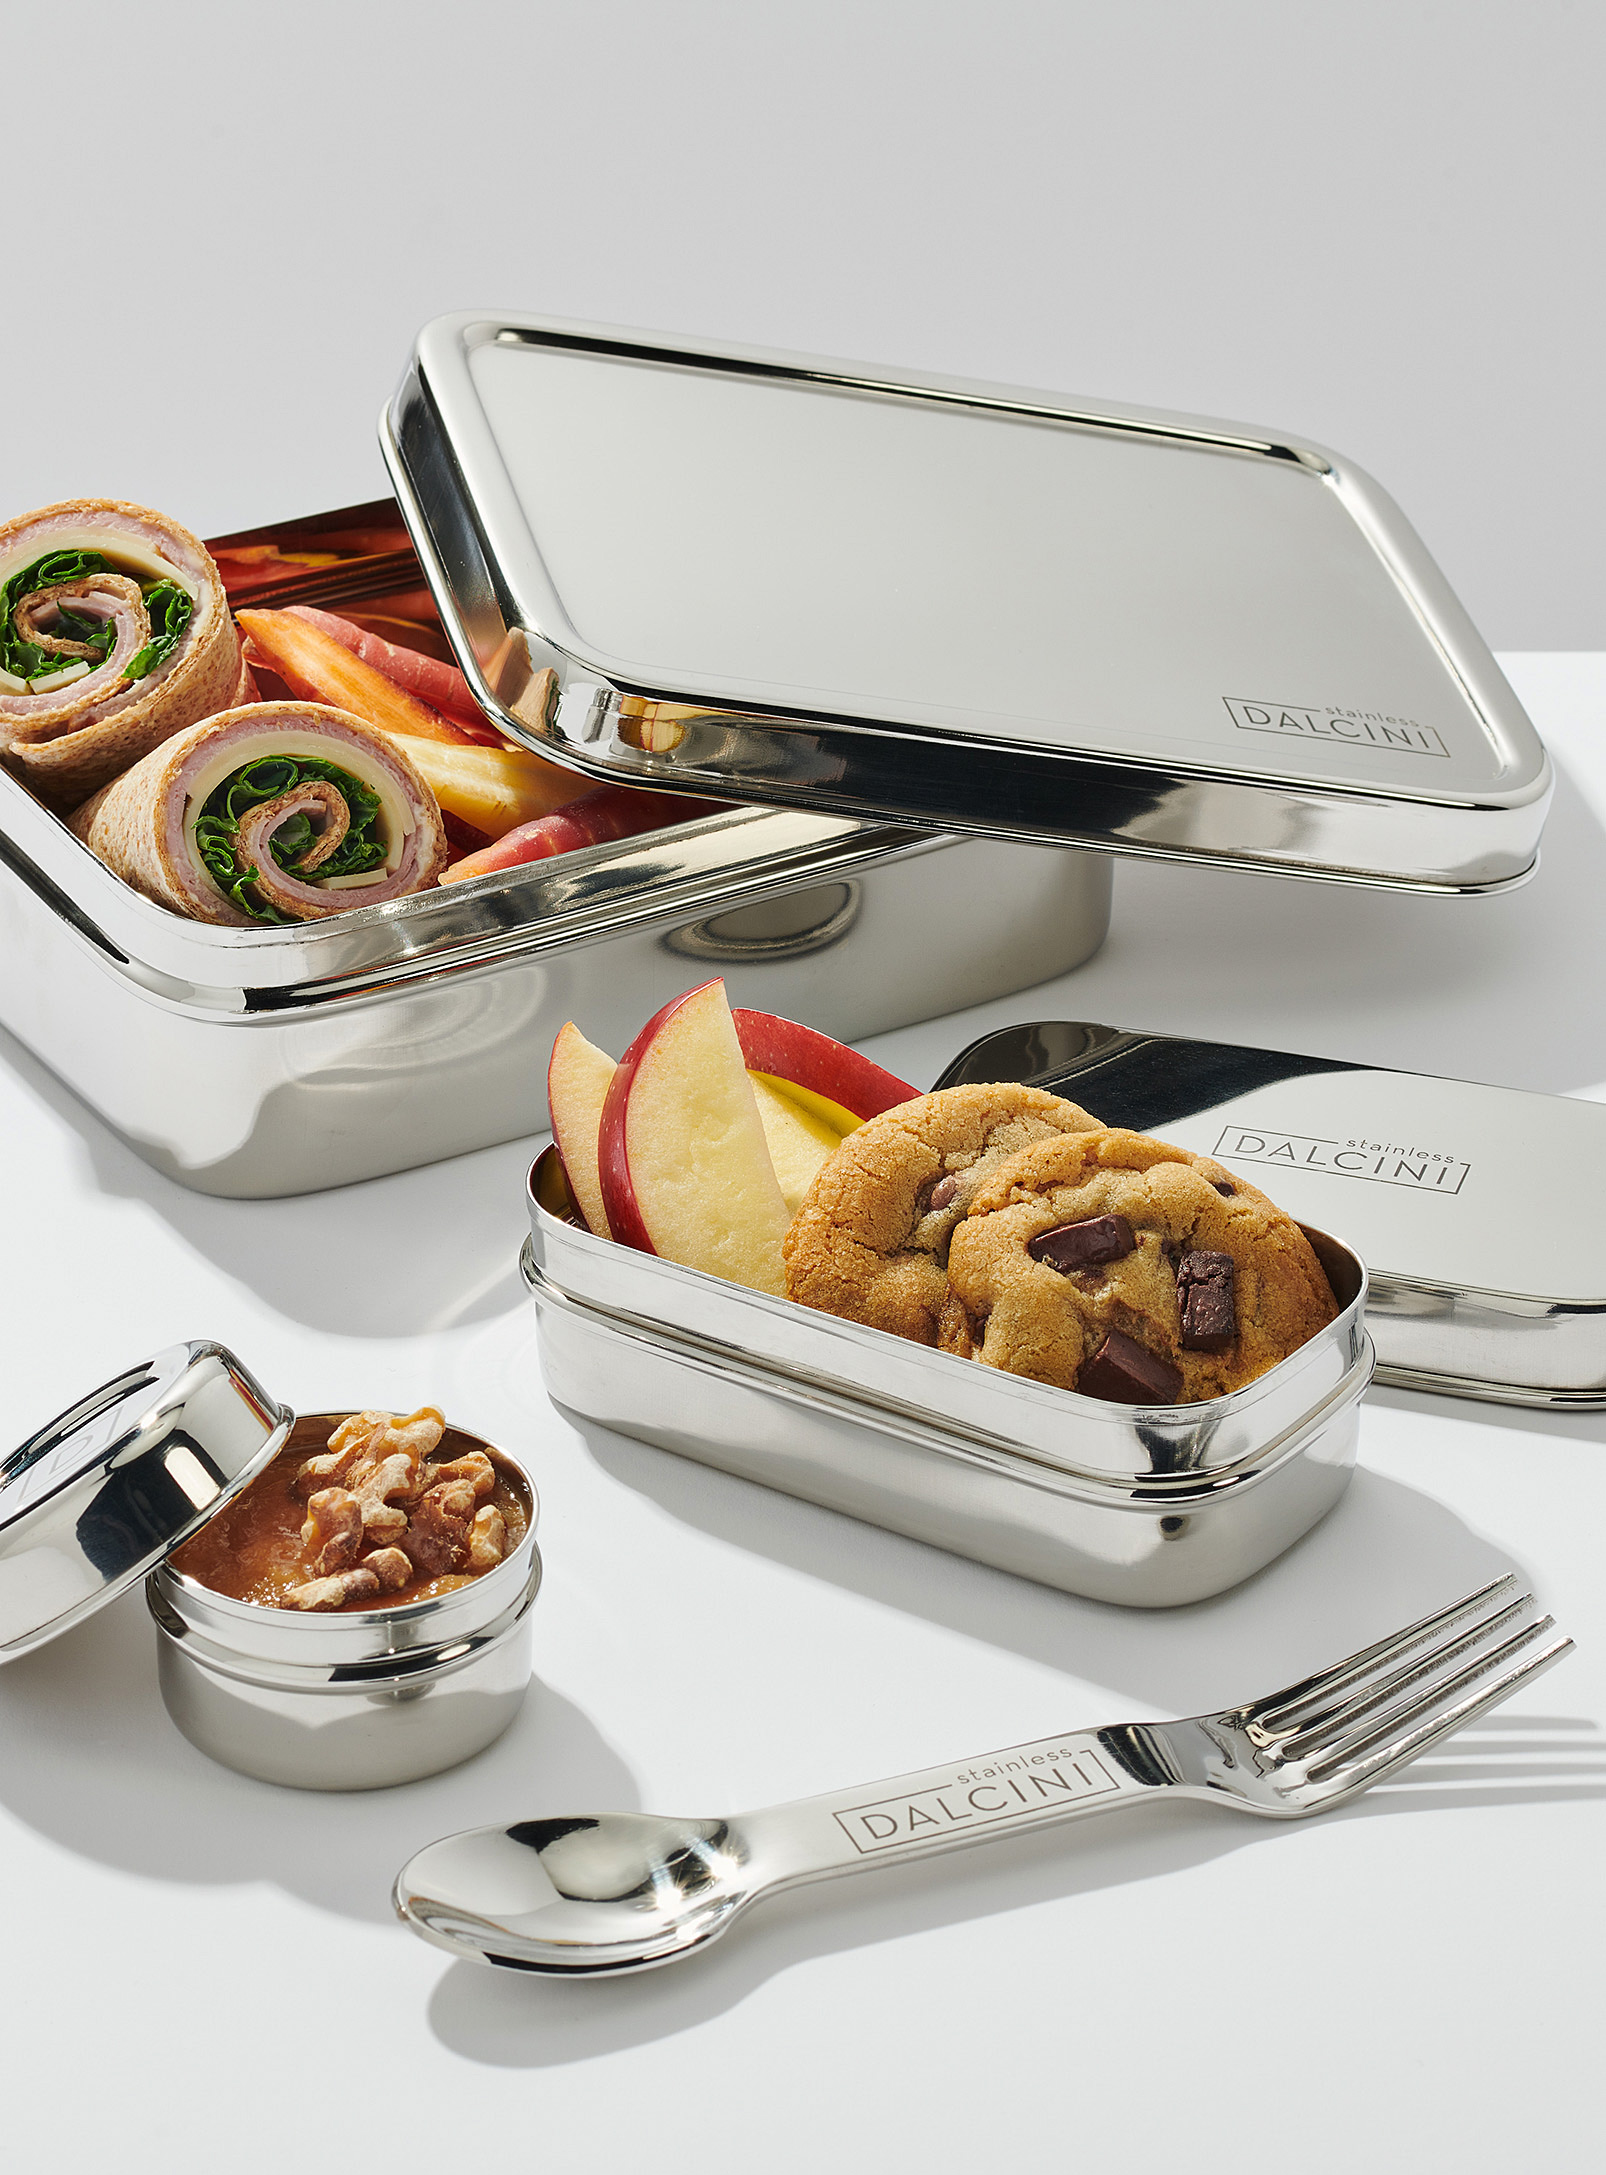 Dalcini Stainless - Stainless sT-Shirtl lunch box 4-piece set